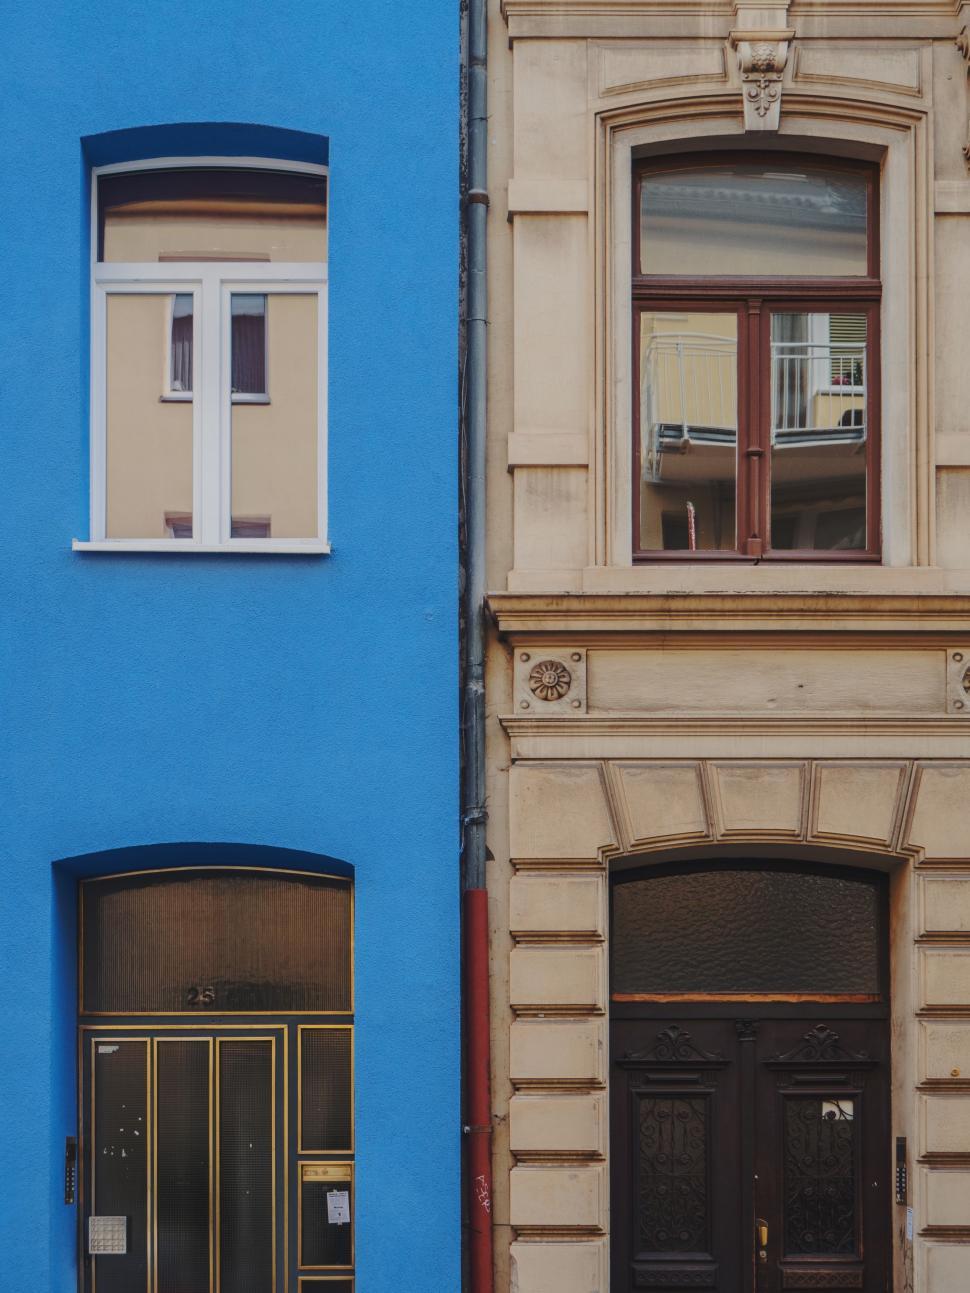 Free Image of Blue Building With Black Door and Windows 